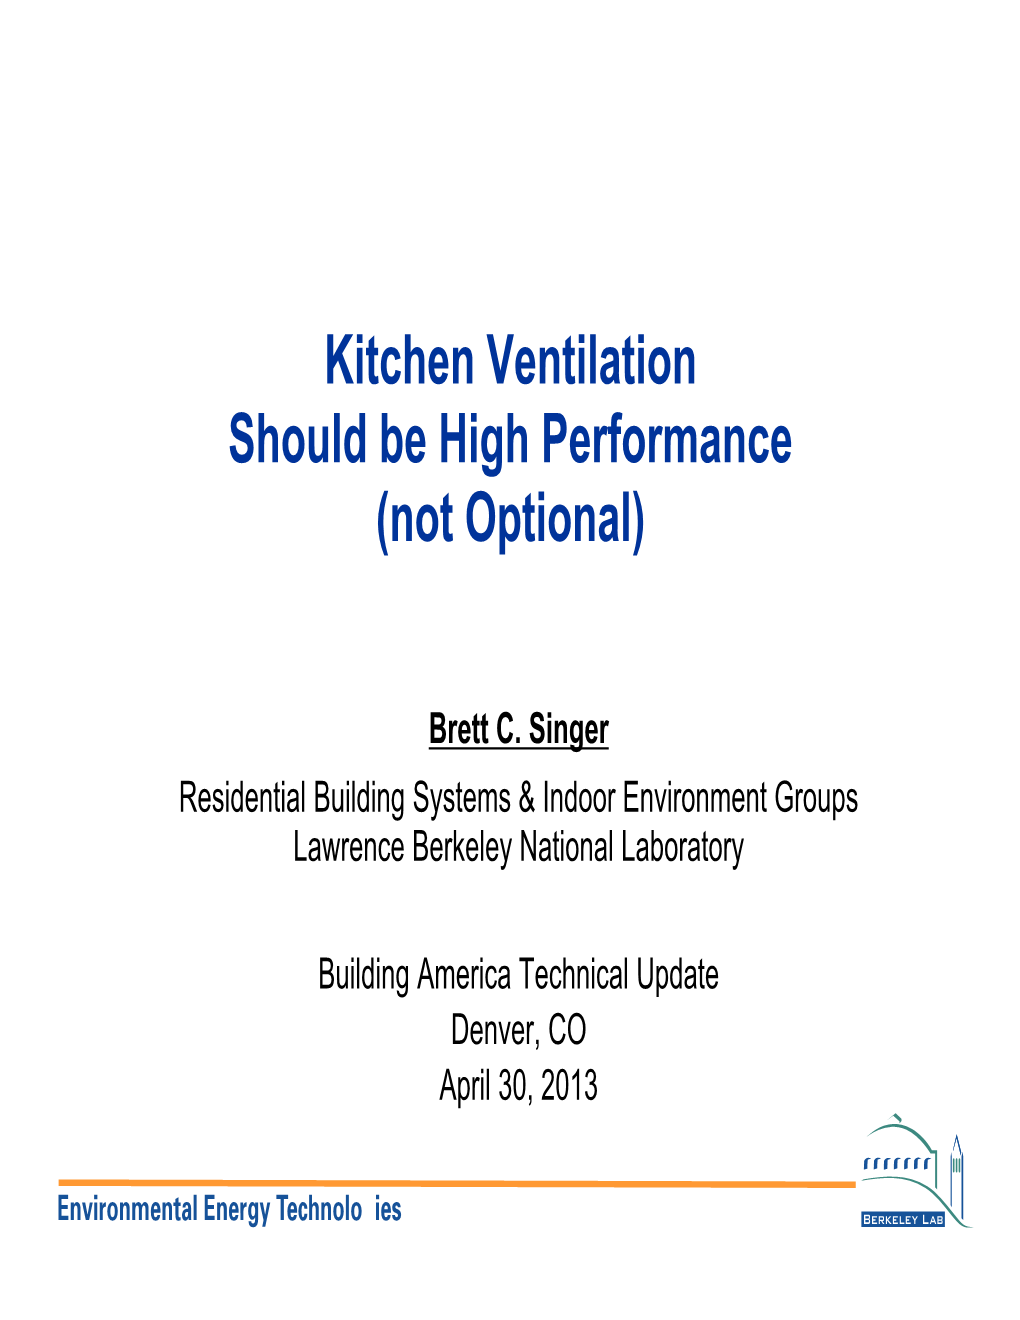 Kitchen Ventilation Should Be High Performance (Not Optional)